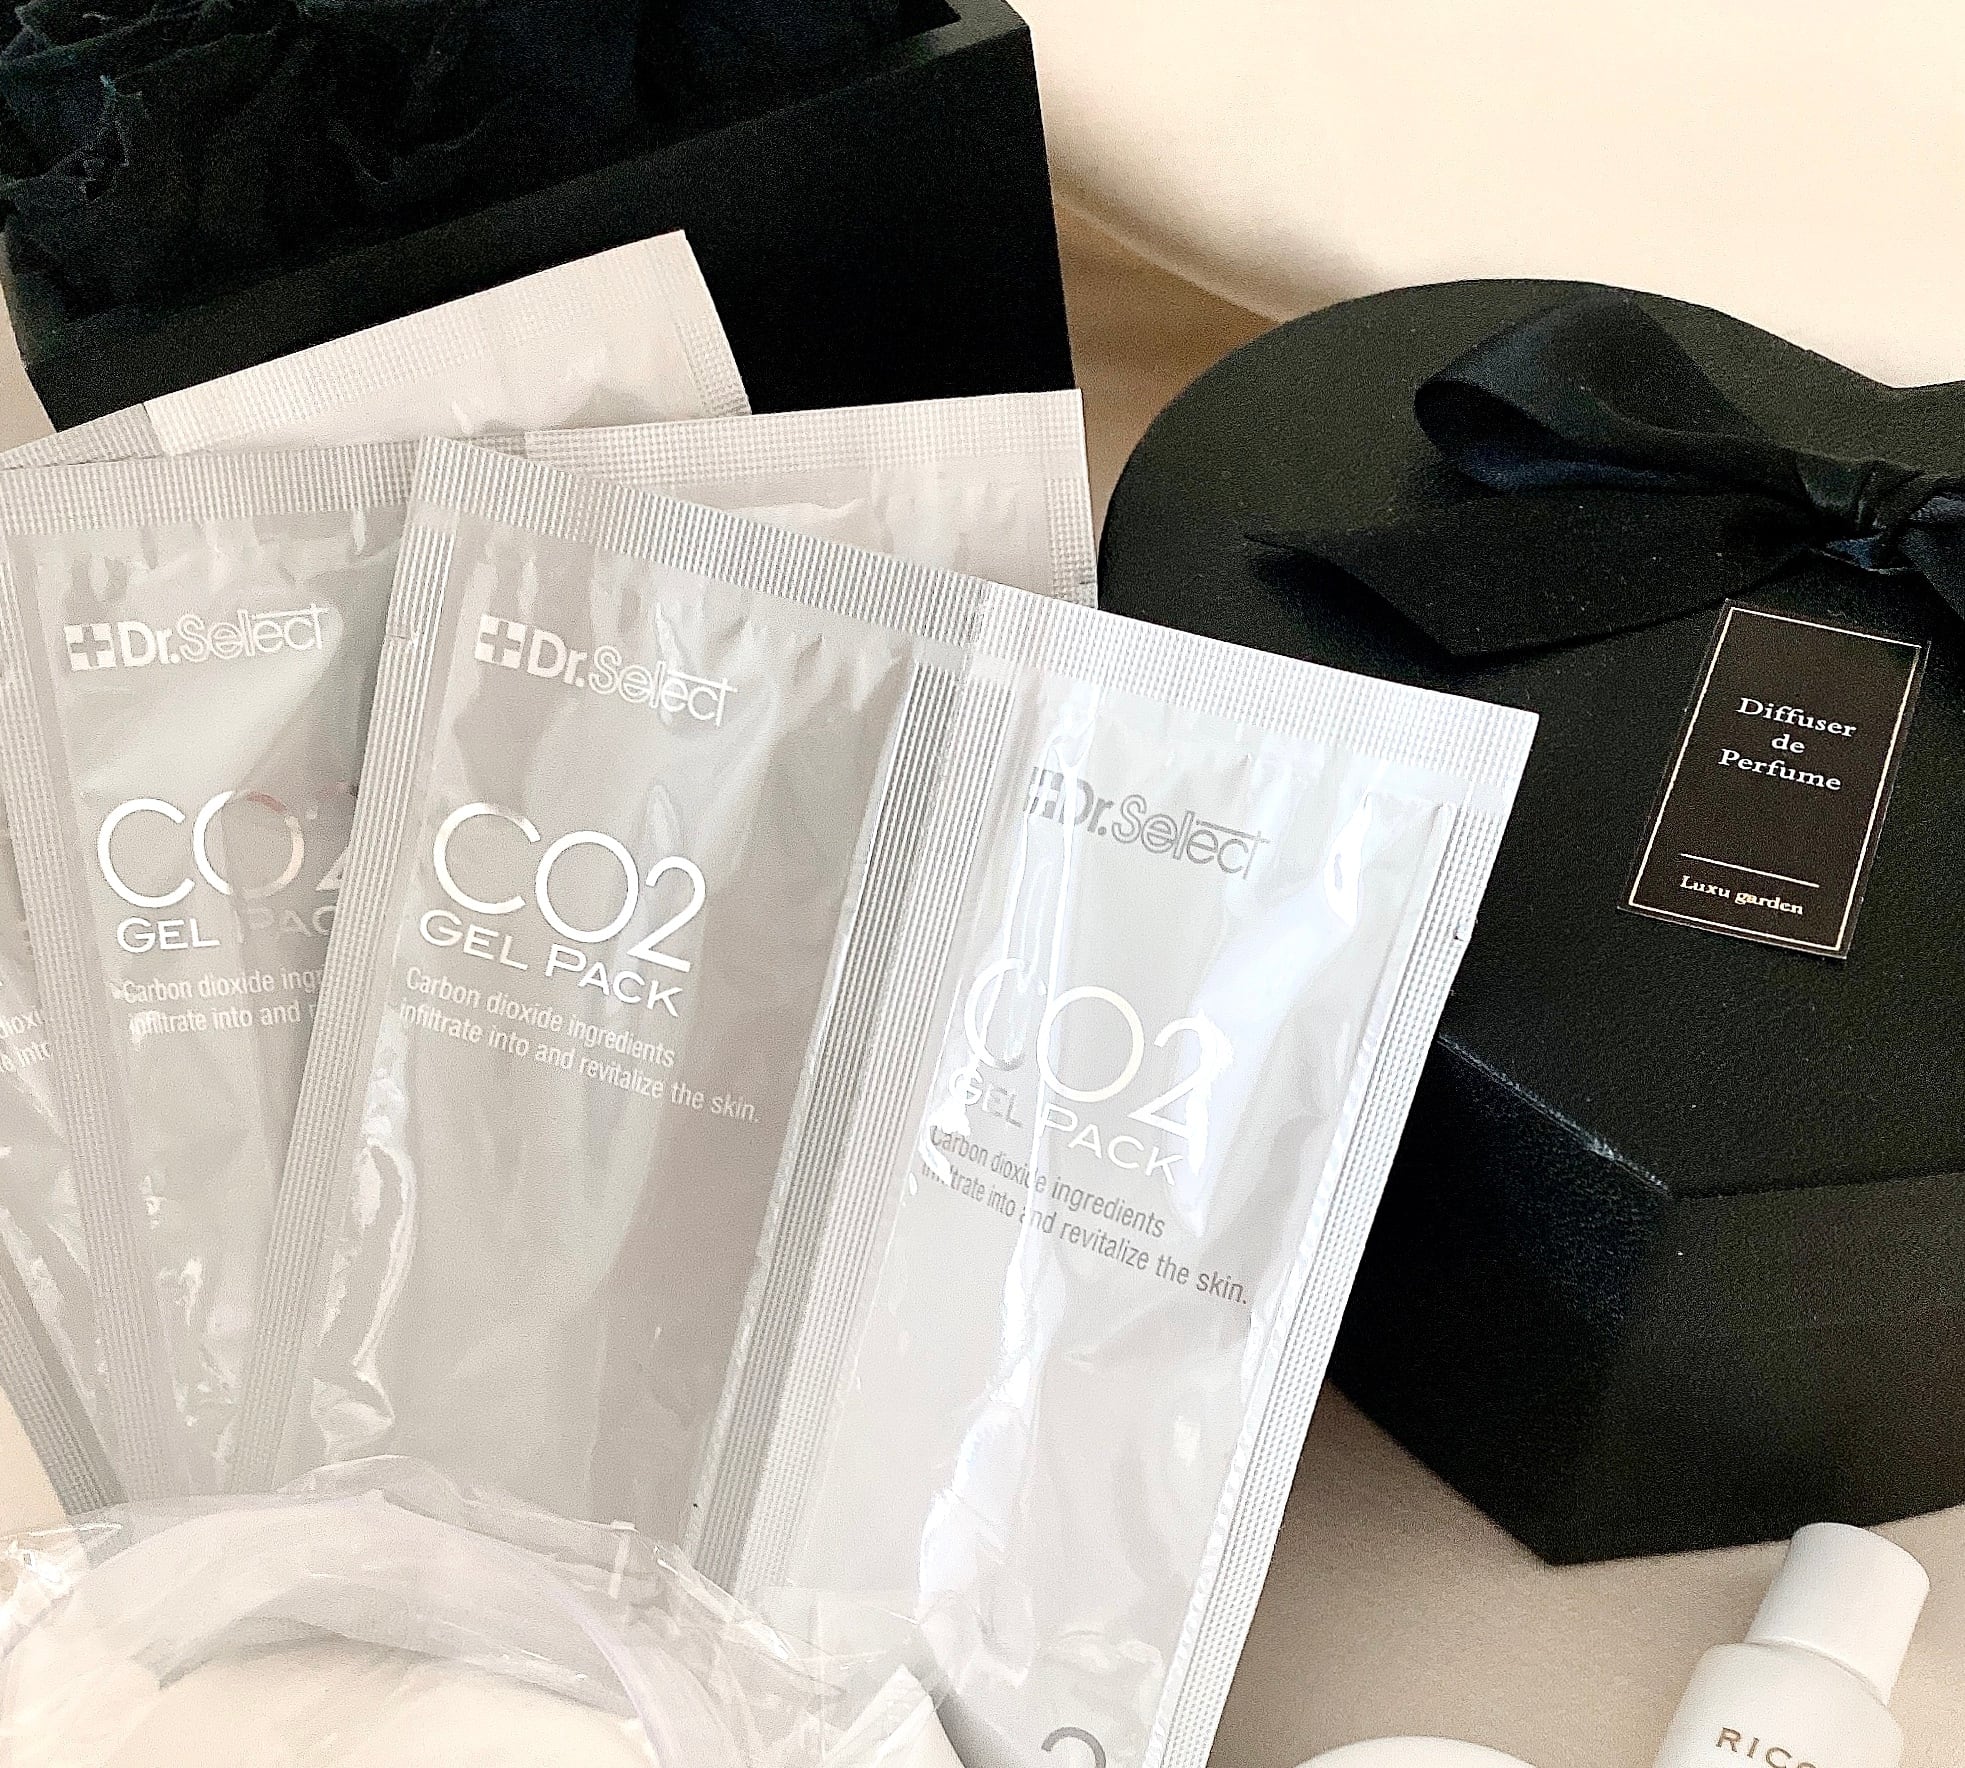 CO2炭酸パック４セット☆限定プレゼントボックス☆ | ALEE BY COSMETIC